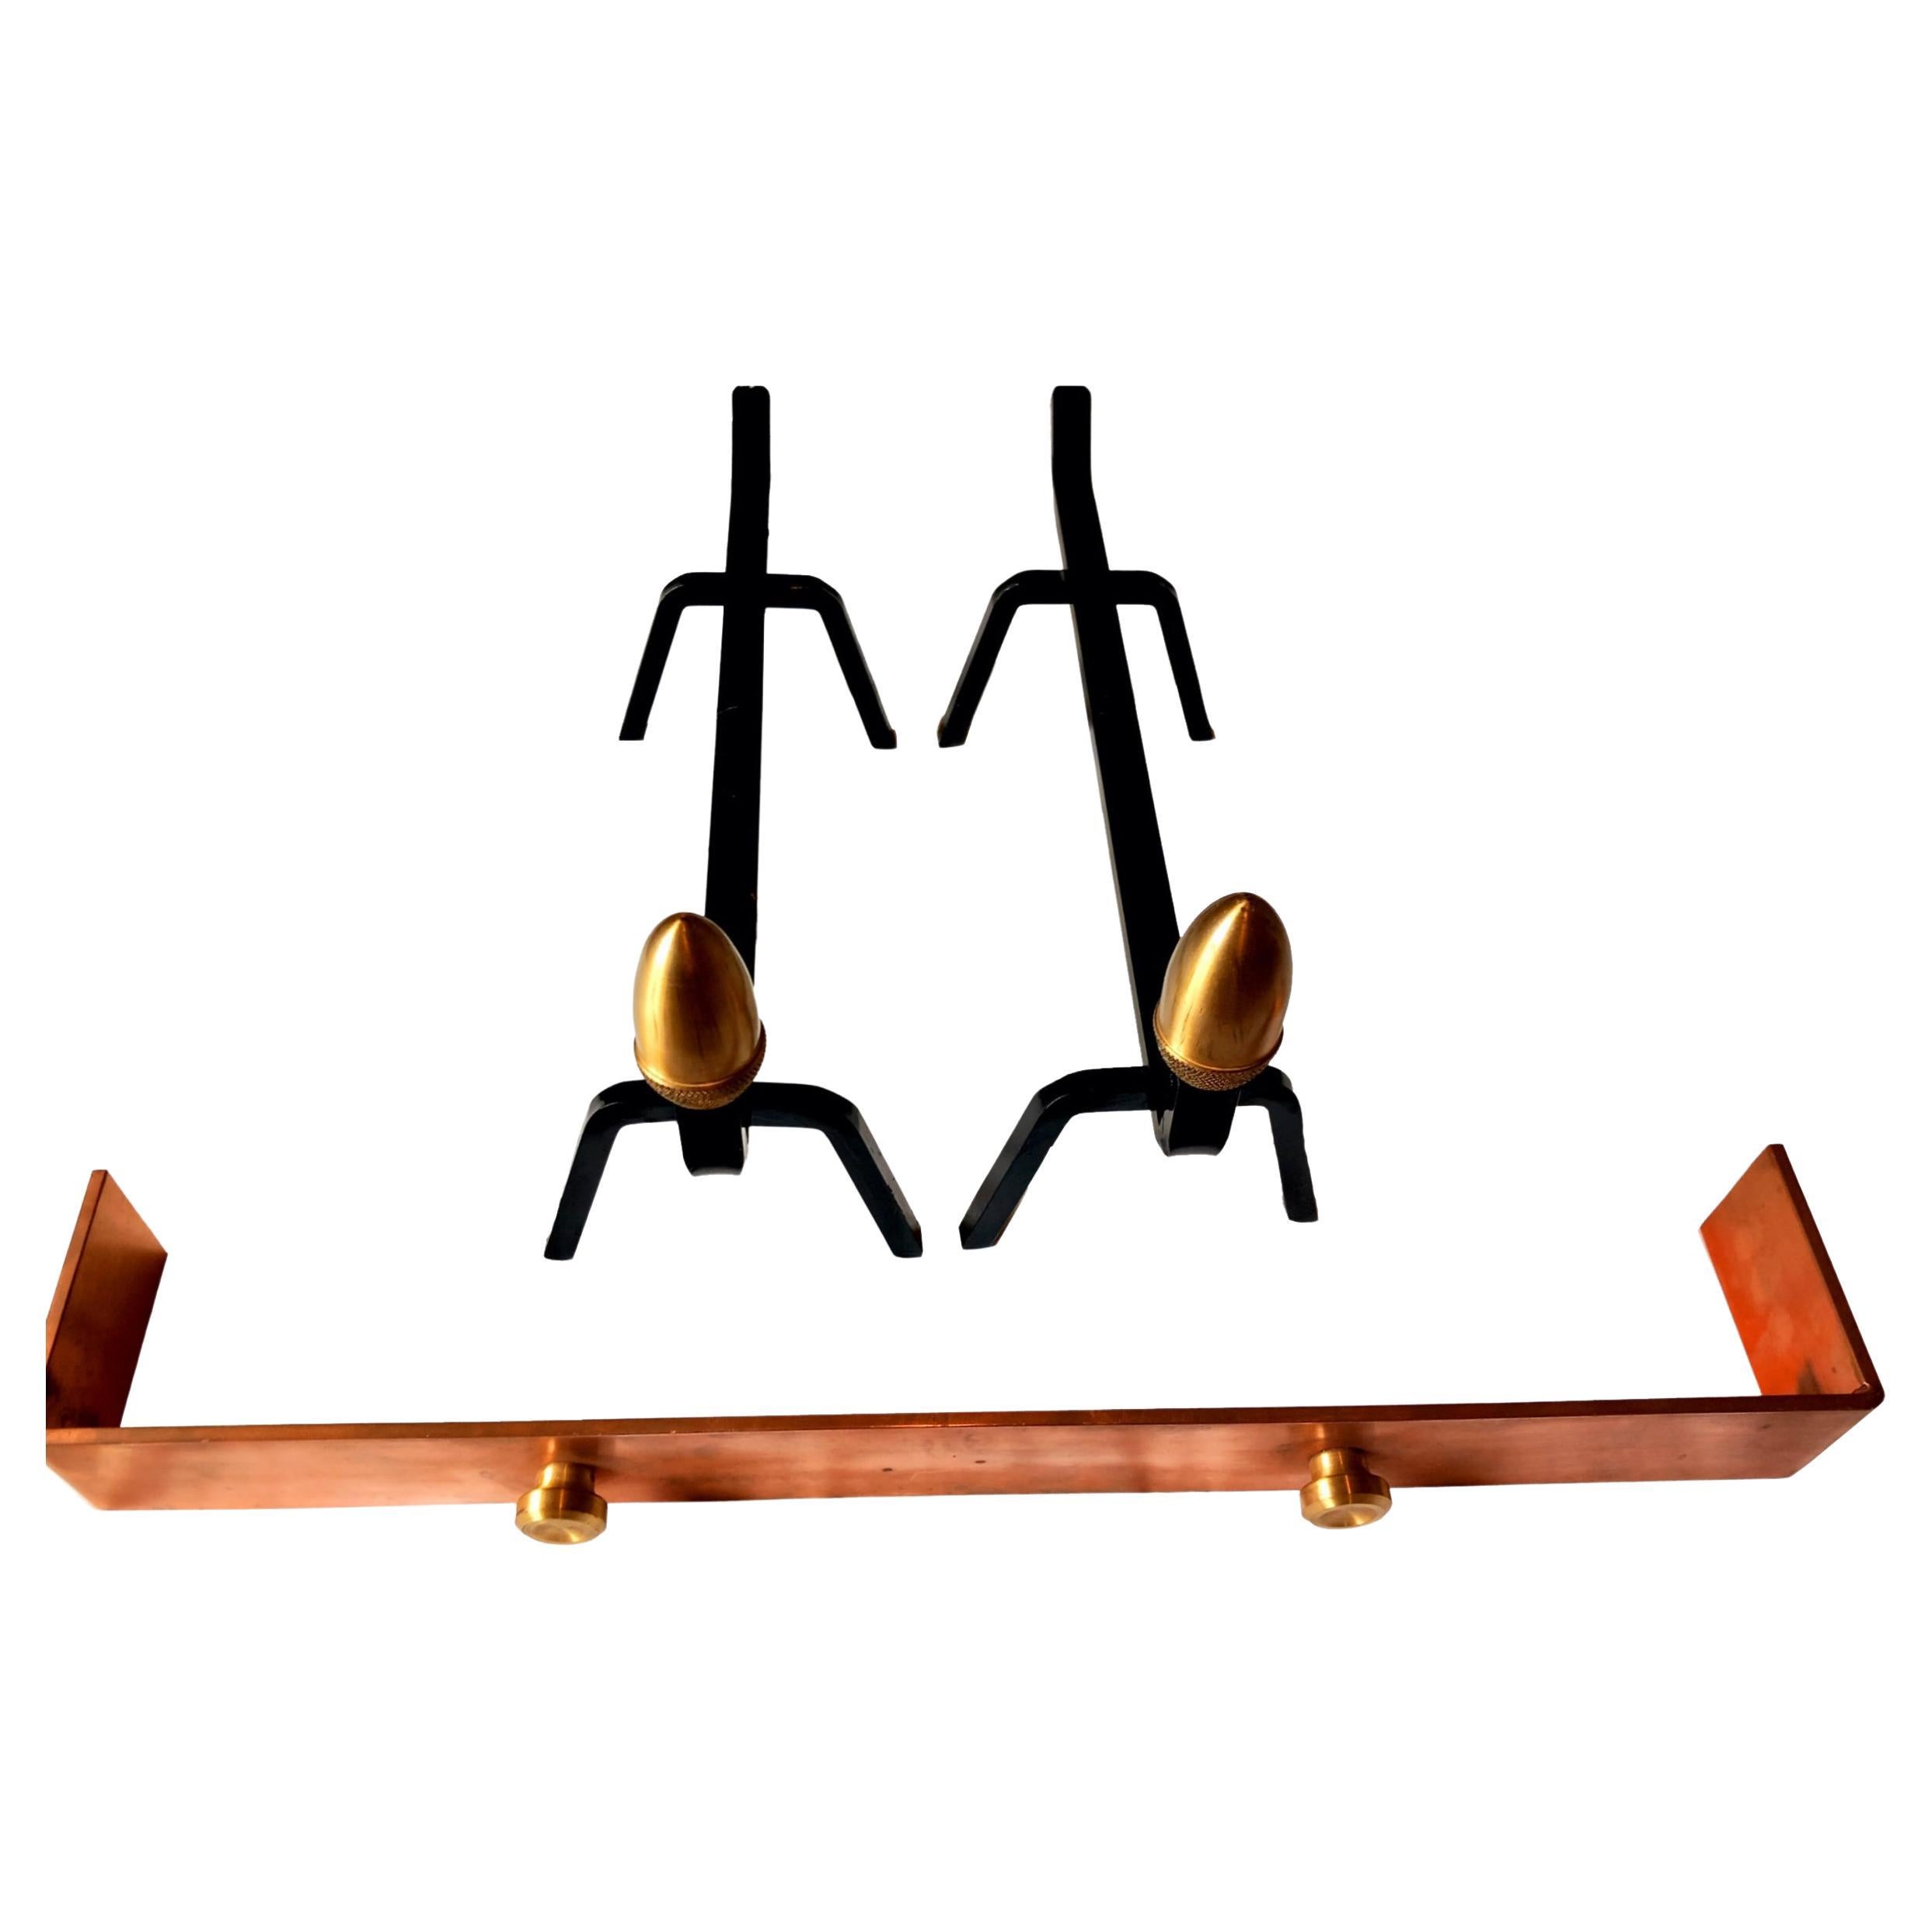 Copper Fireplace protector 60 W -11 D -6 H cm
Andiros 13 W .50 D. 22 H Cm
They were never used, just for decoration on a fireplace.
Iron and bronze Fireplace andirons and copper and brass Fireplace protector
chimney
pair of wrought iron